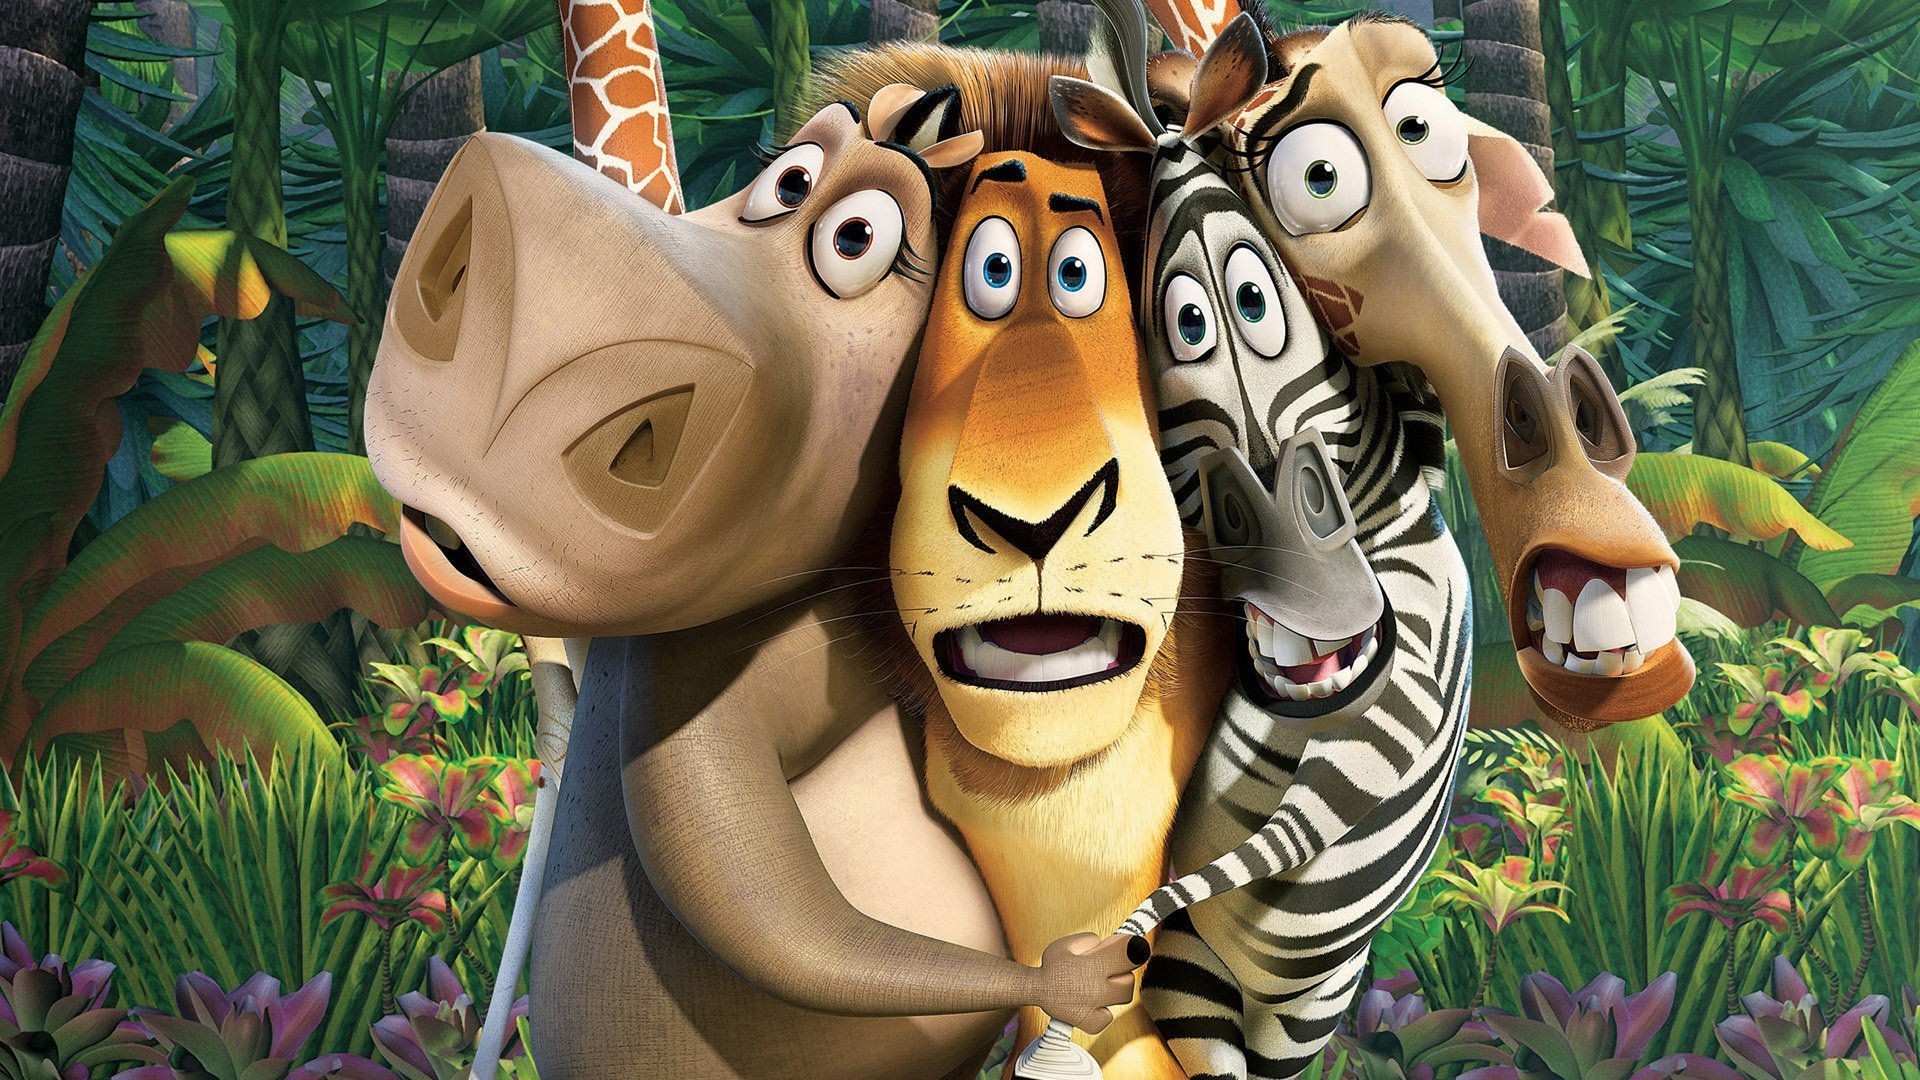 1920x1080 movies, Madagascar (movie) Wallpapers HD / Desktop and Mobile Backgrounds